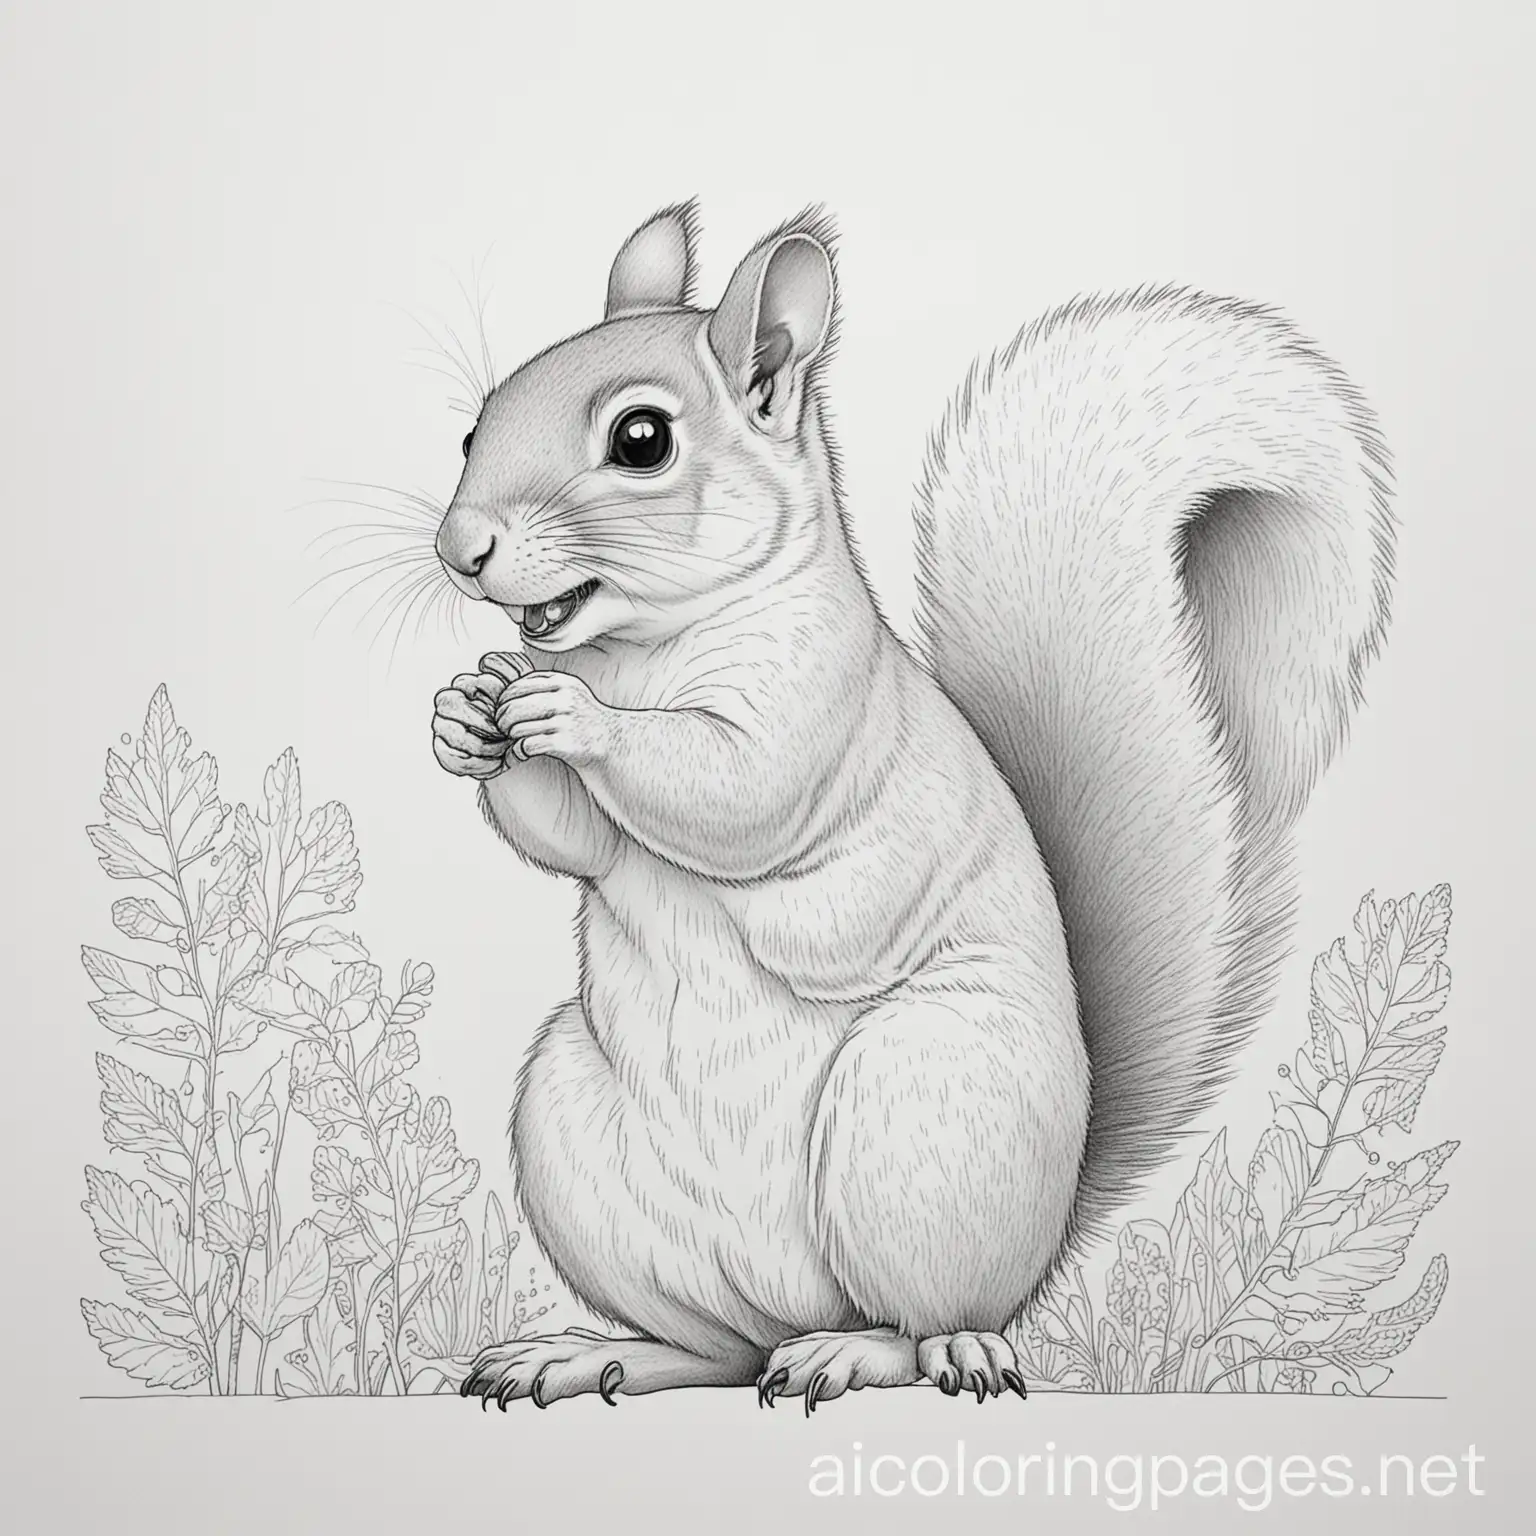 happy squirrel 
, Coloring Page, black and white, line art, white background, Simplicity, Ample White Space. The background of the coloring page is plain white to make it easy for young children to color within the lines. The outlines of all the subjects are easy to distinguish, making it simple for kids to color without too much difficulty